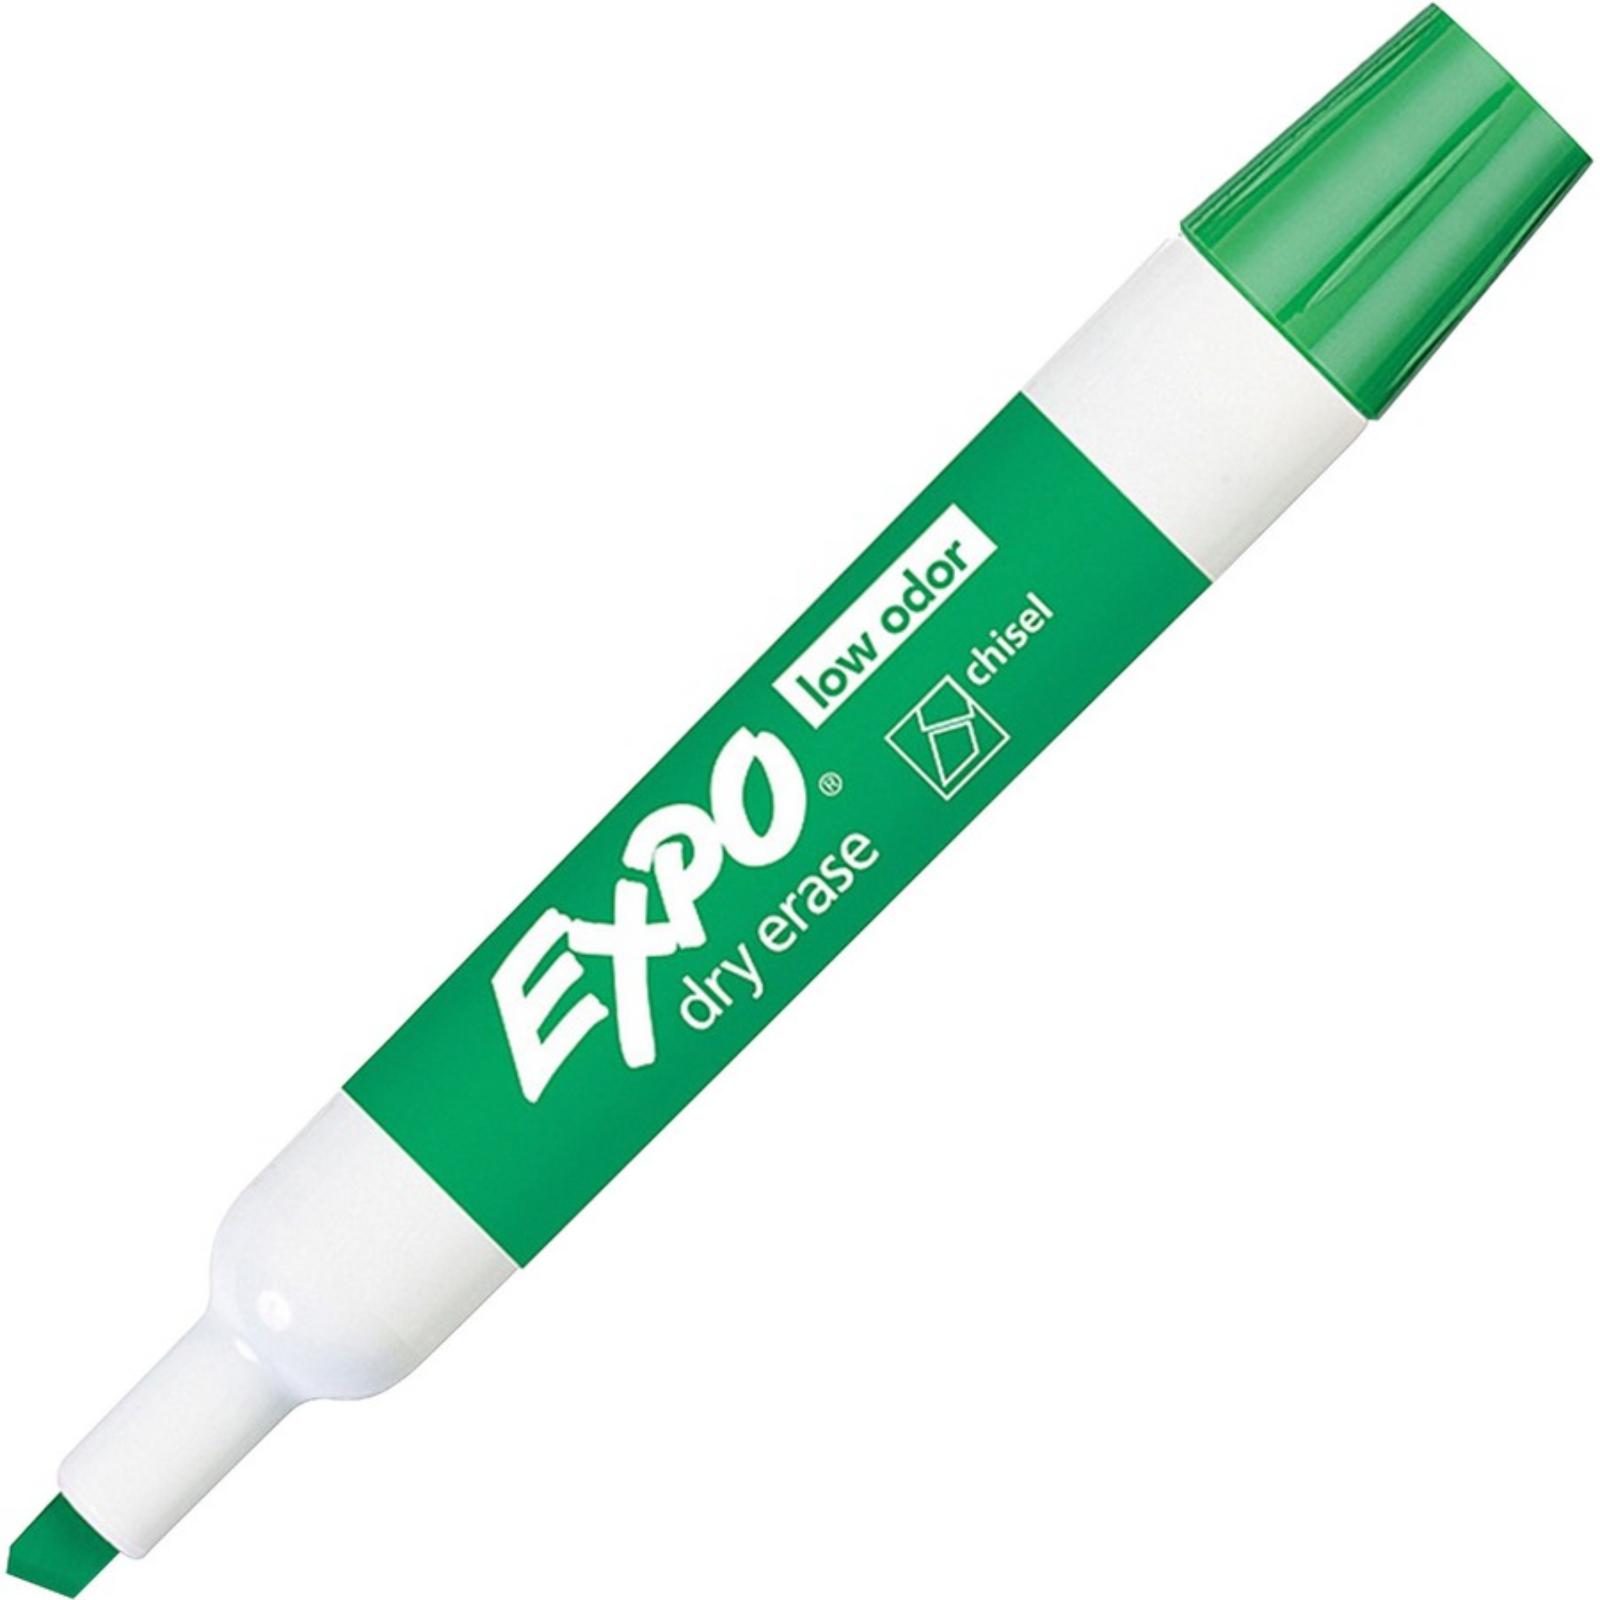 MARKER - EXPO GREEN CHISE